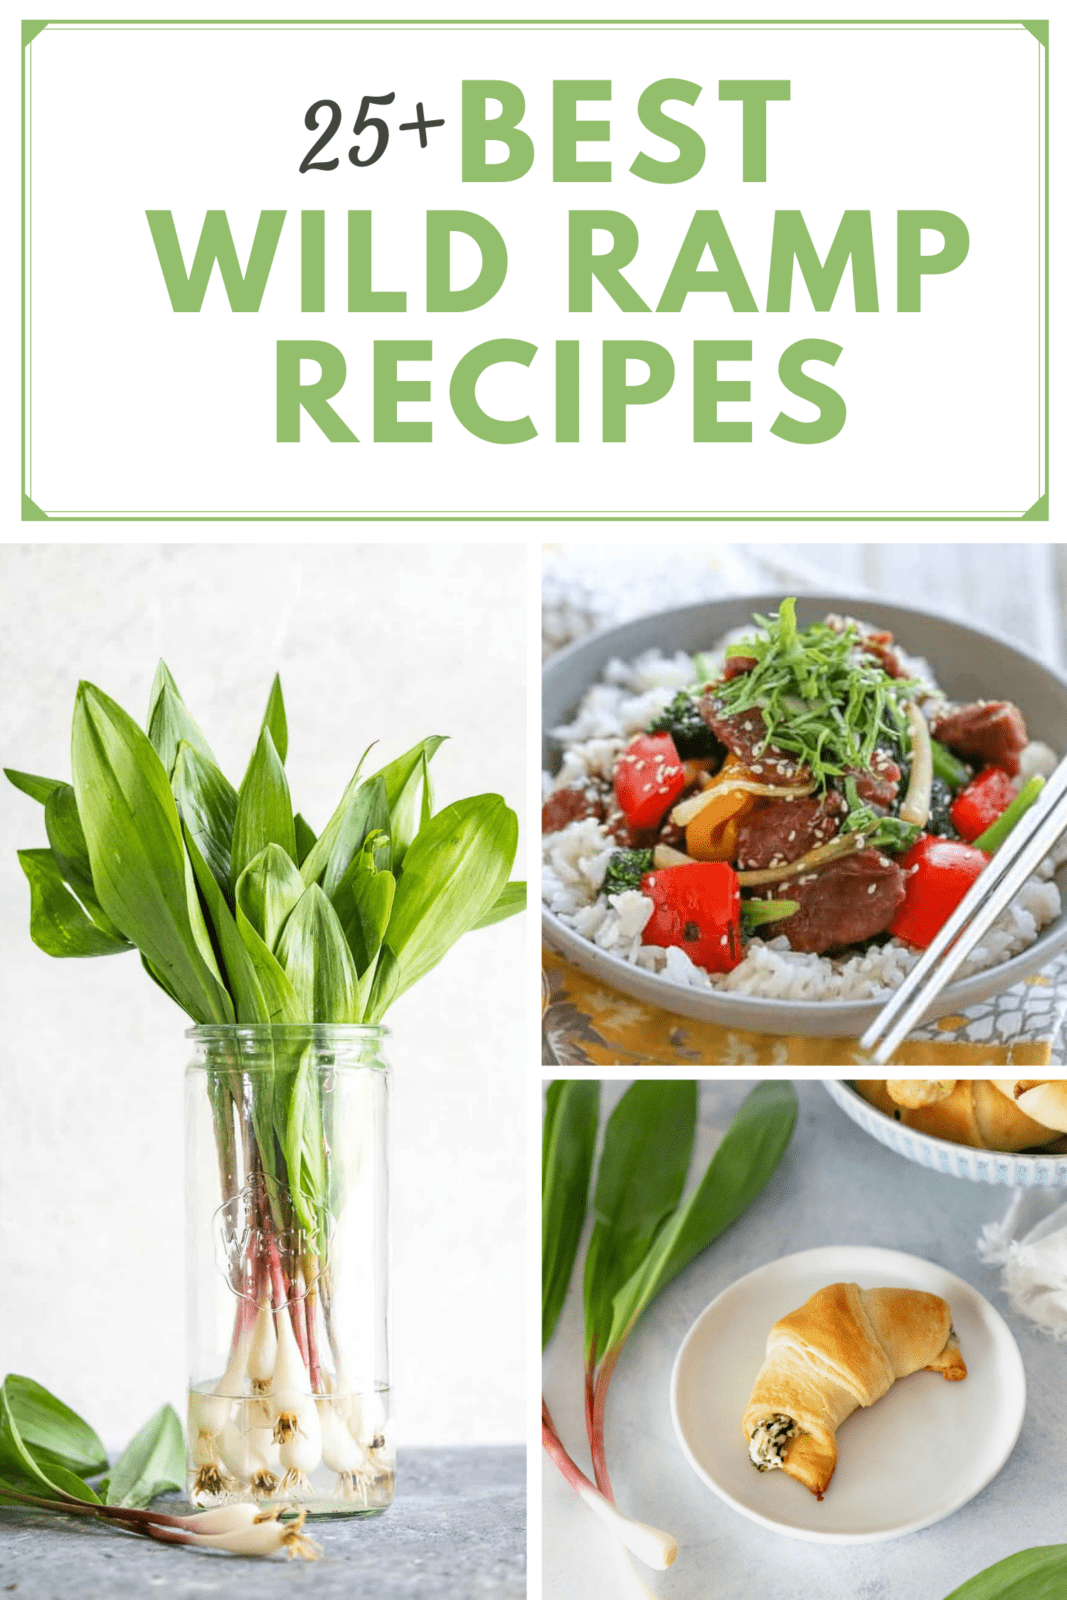 If you have never heard of wild ramps before, then you have been missing out! Also know as wild leeks, they are popular spring edible throughout Appalachia with a cult-like following. I've put together a list of the best recipes using ramps to inspire you to enjoy them in your kitchen!